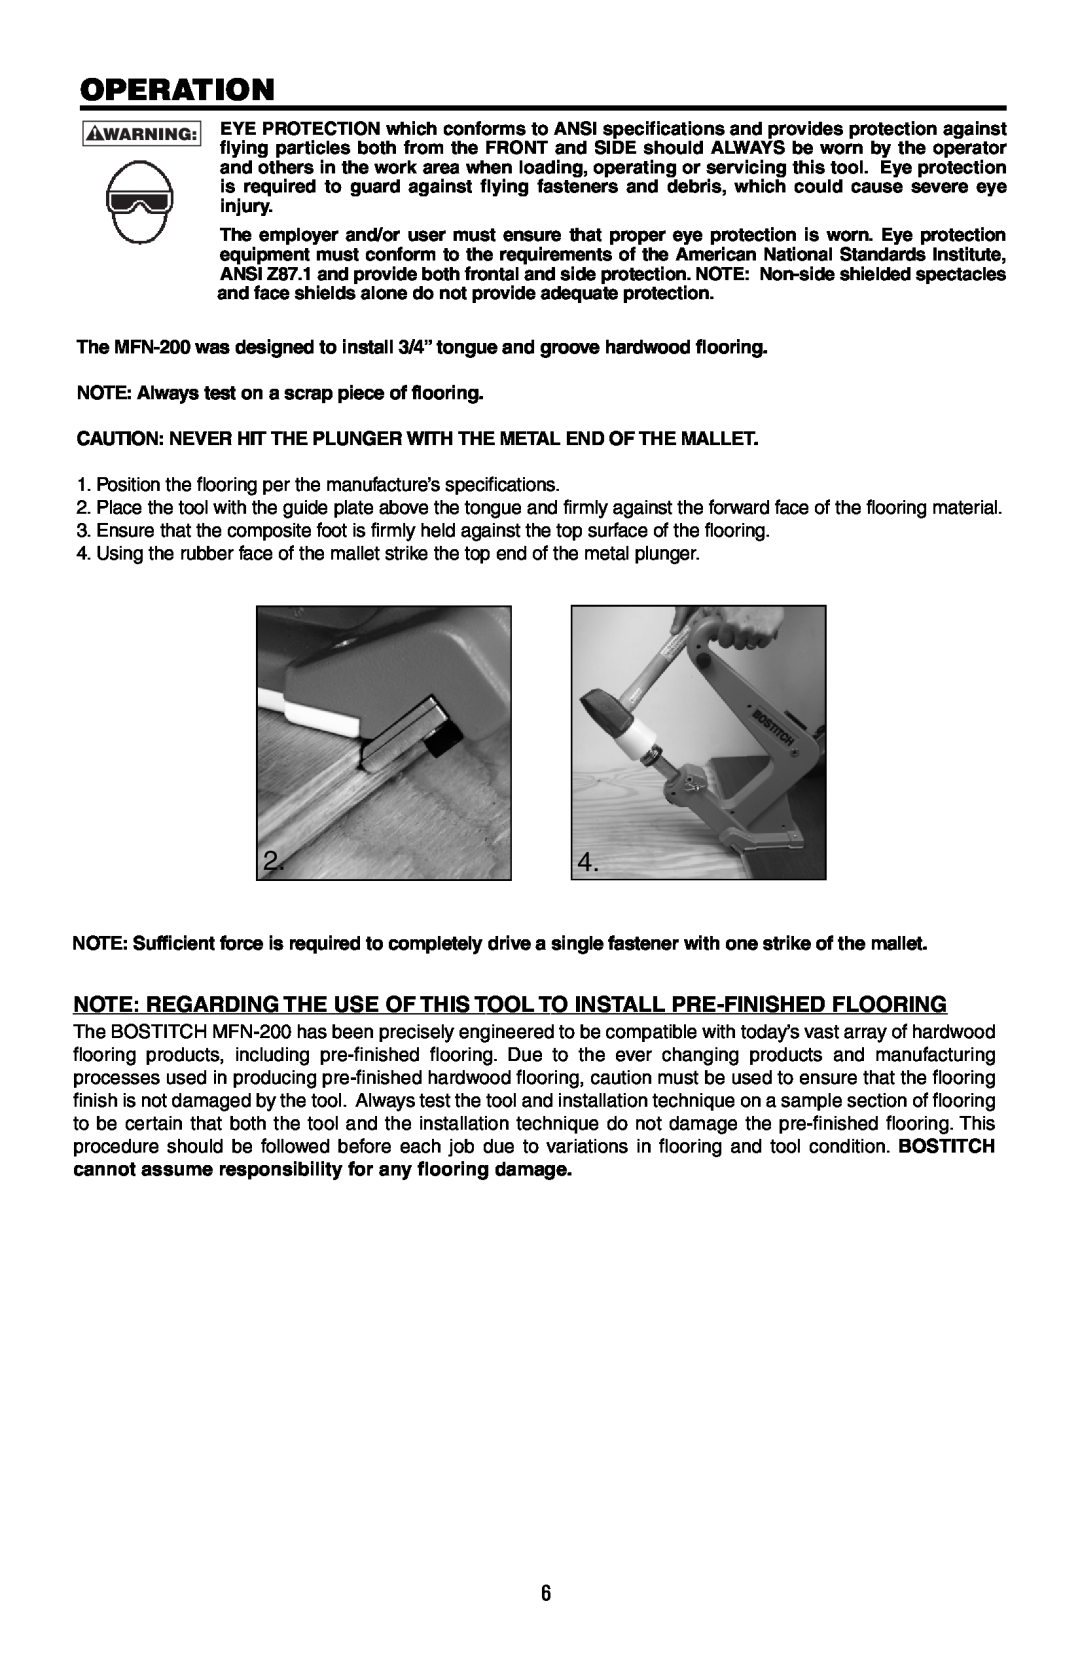 Bostitch MFN-200, 175616REVB manual Operation, Note Regarding The Use Of This Tool To Install Pre-Finished Flooring 